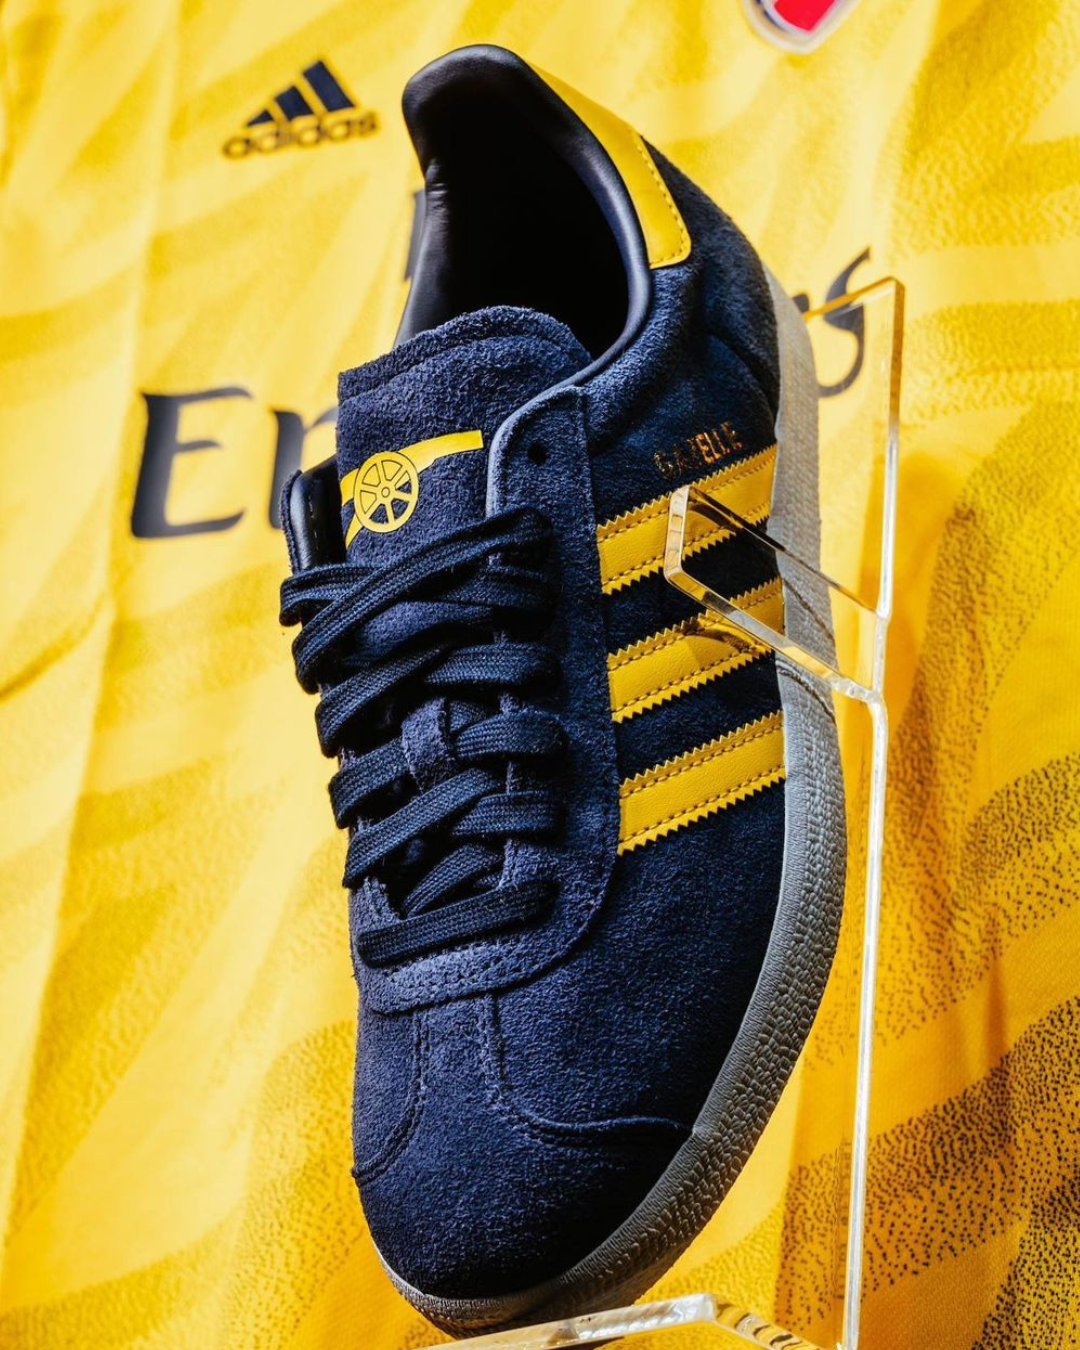 The new adidas Gazelle dedicated to clubs and national football teams adidas has launched its new series of shoes dedicated to football clubs